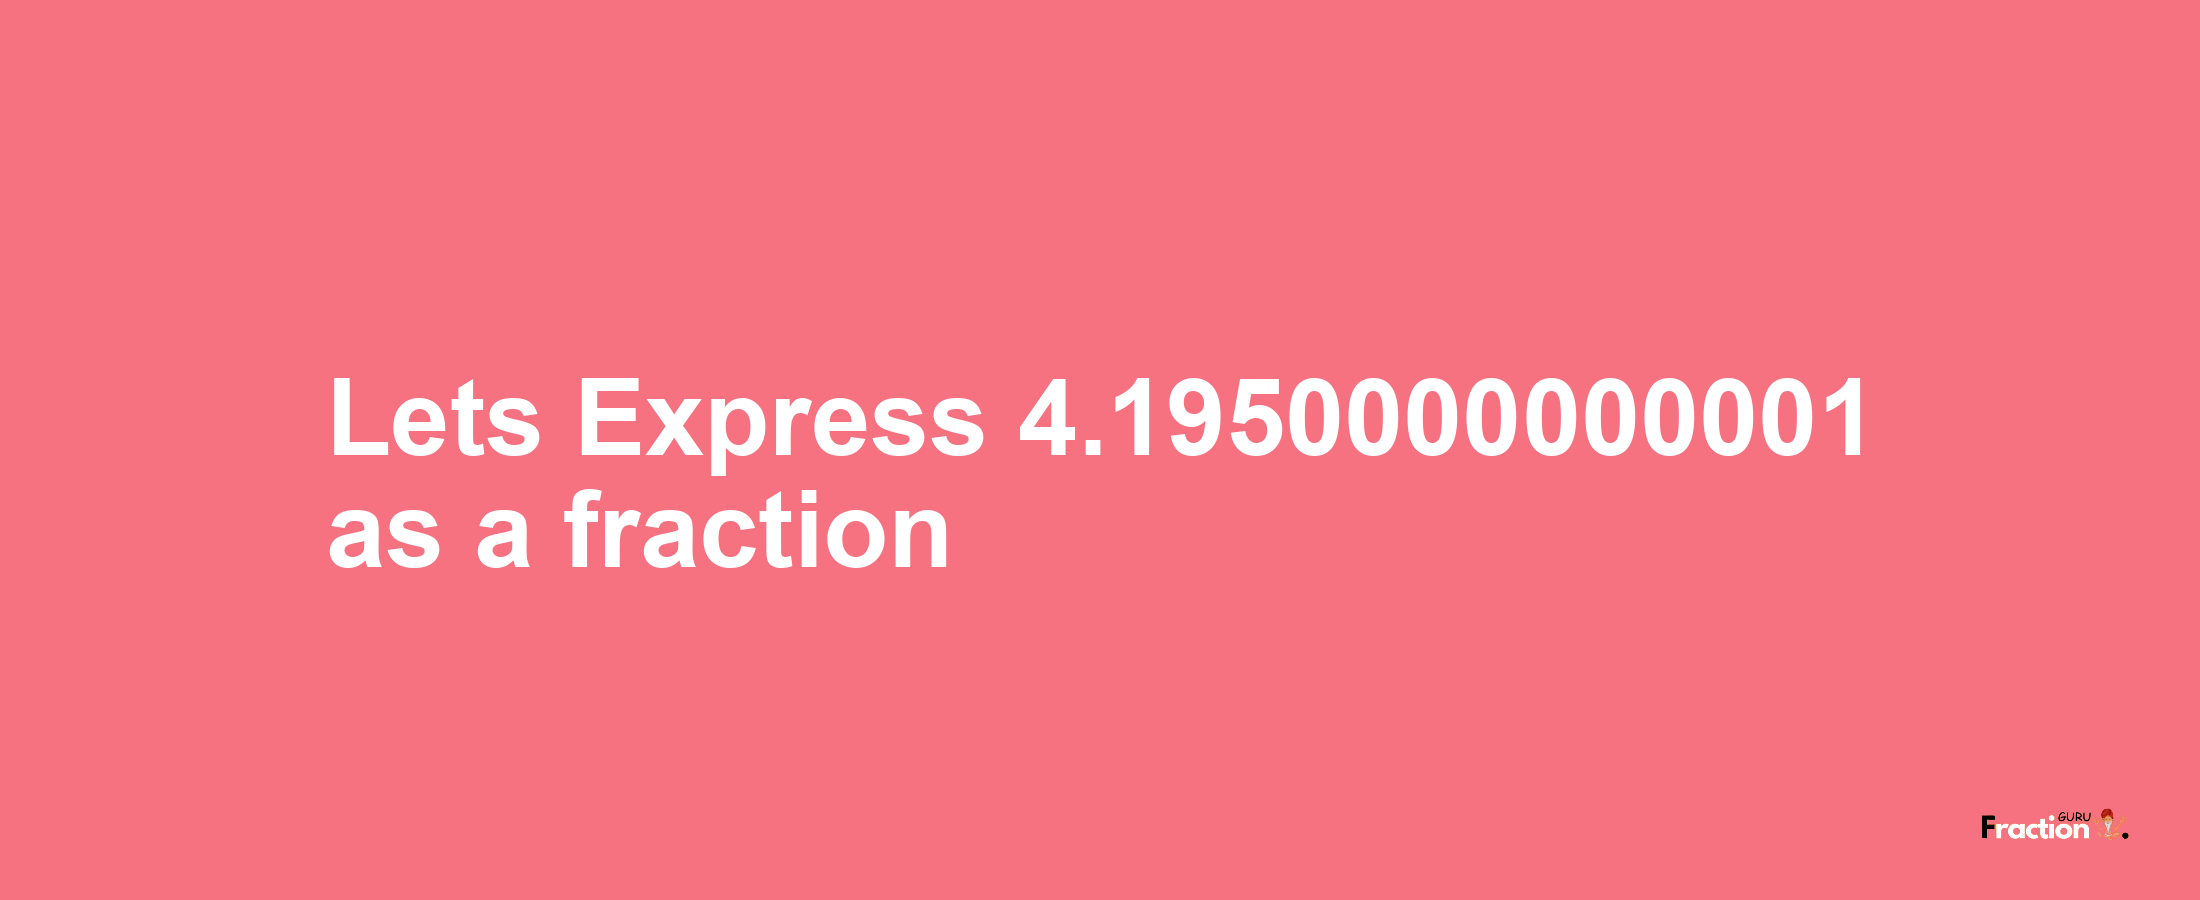 Lets Express 4.1950000000001 as afraction